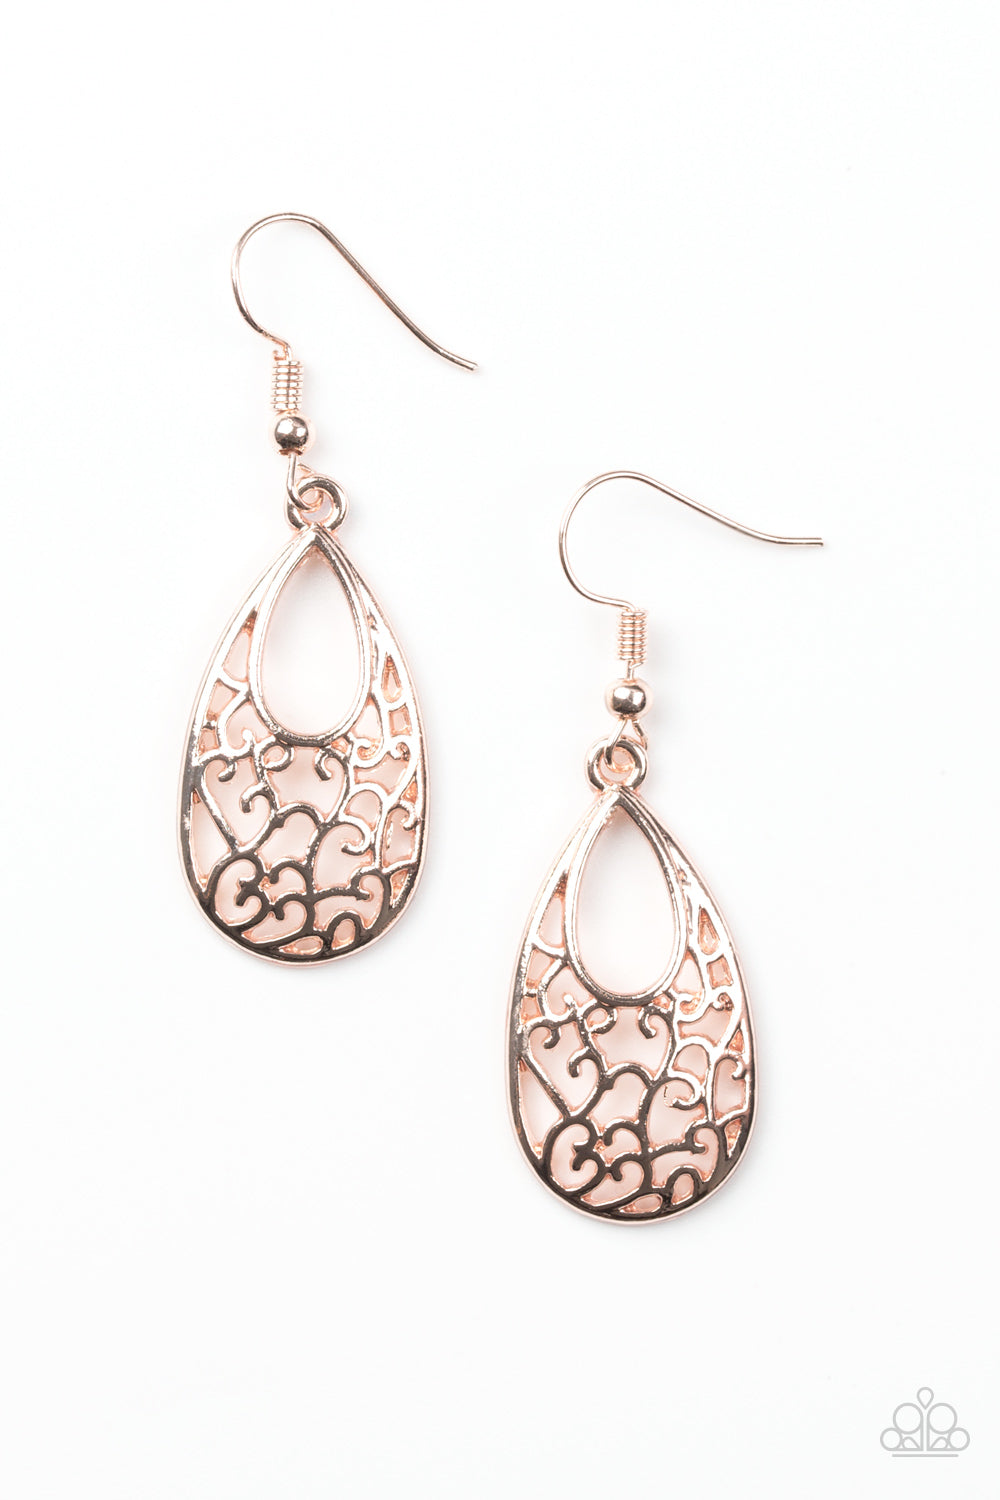 Paparazzi Always Be VINE - Rose Gold - Earrings - $5 Jewelry With Ashley Swint